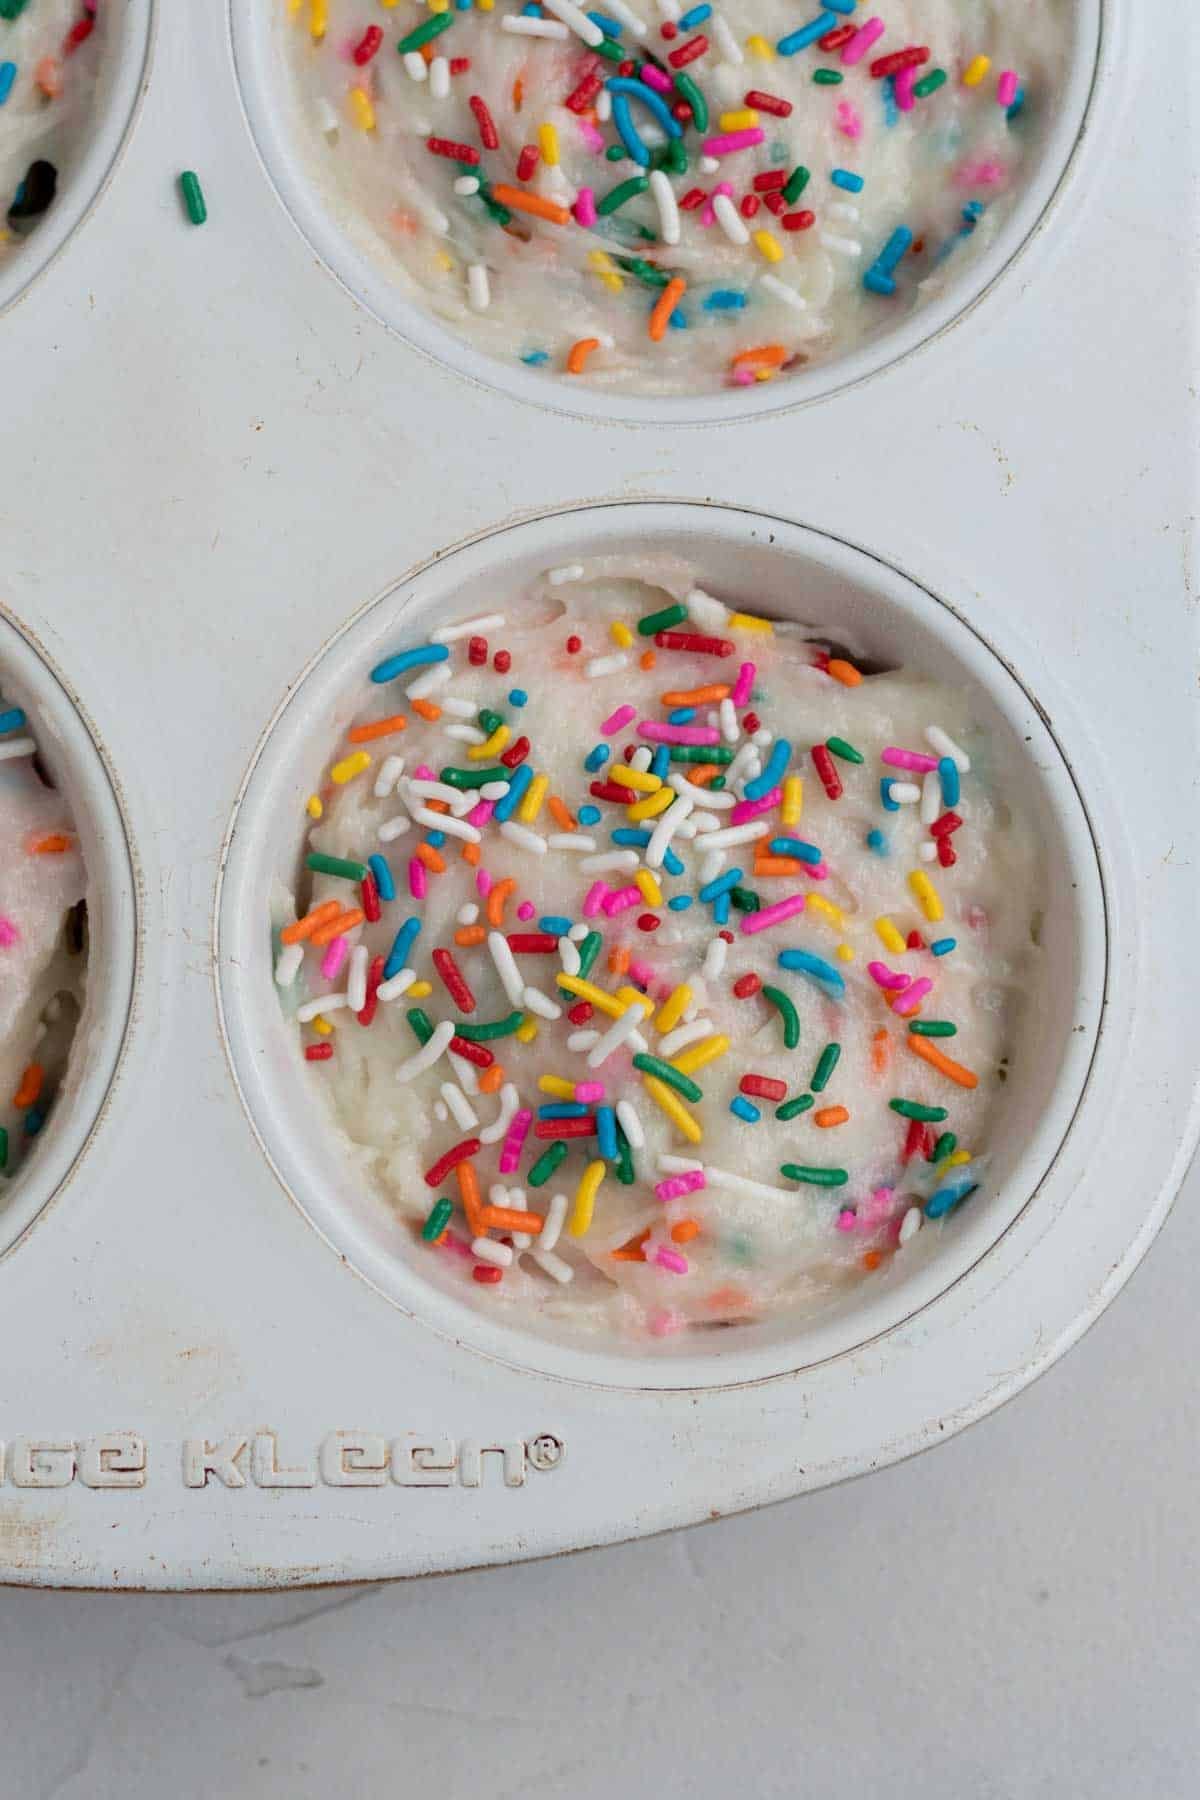 Adding extra rainbow sprinkles to the tops of the muffin batter.